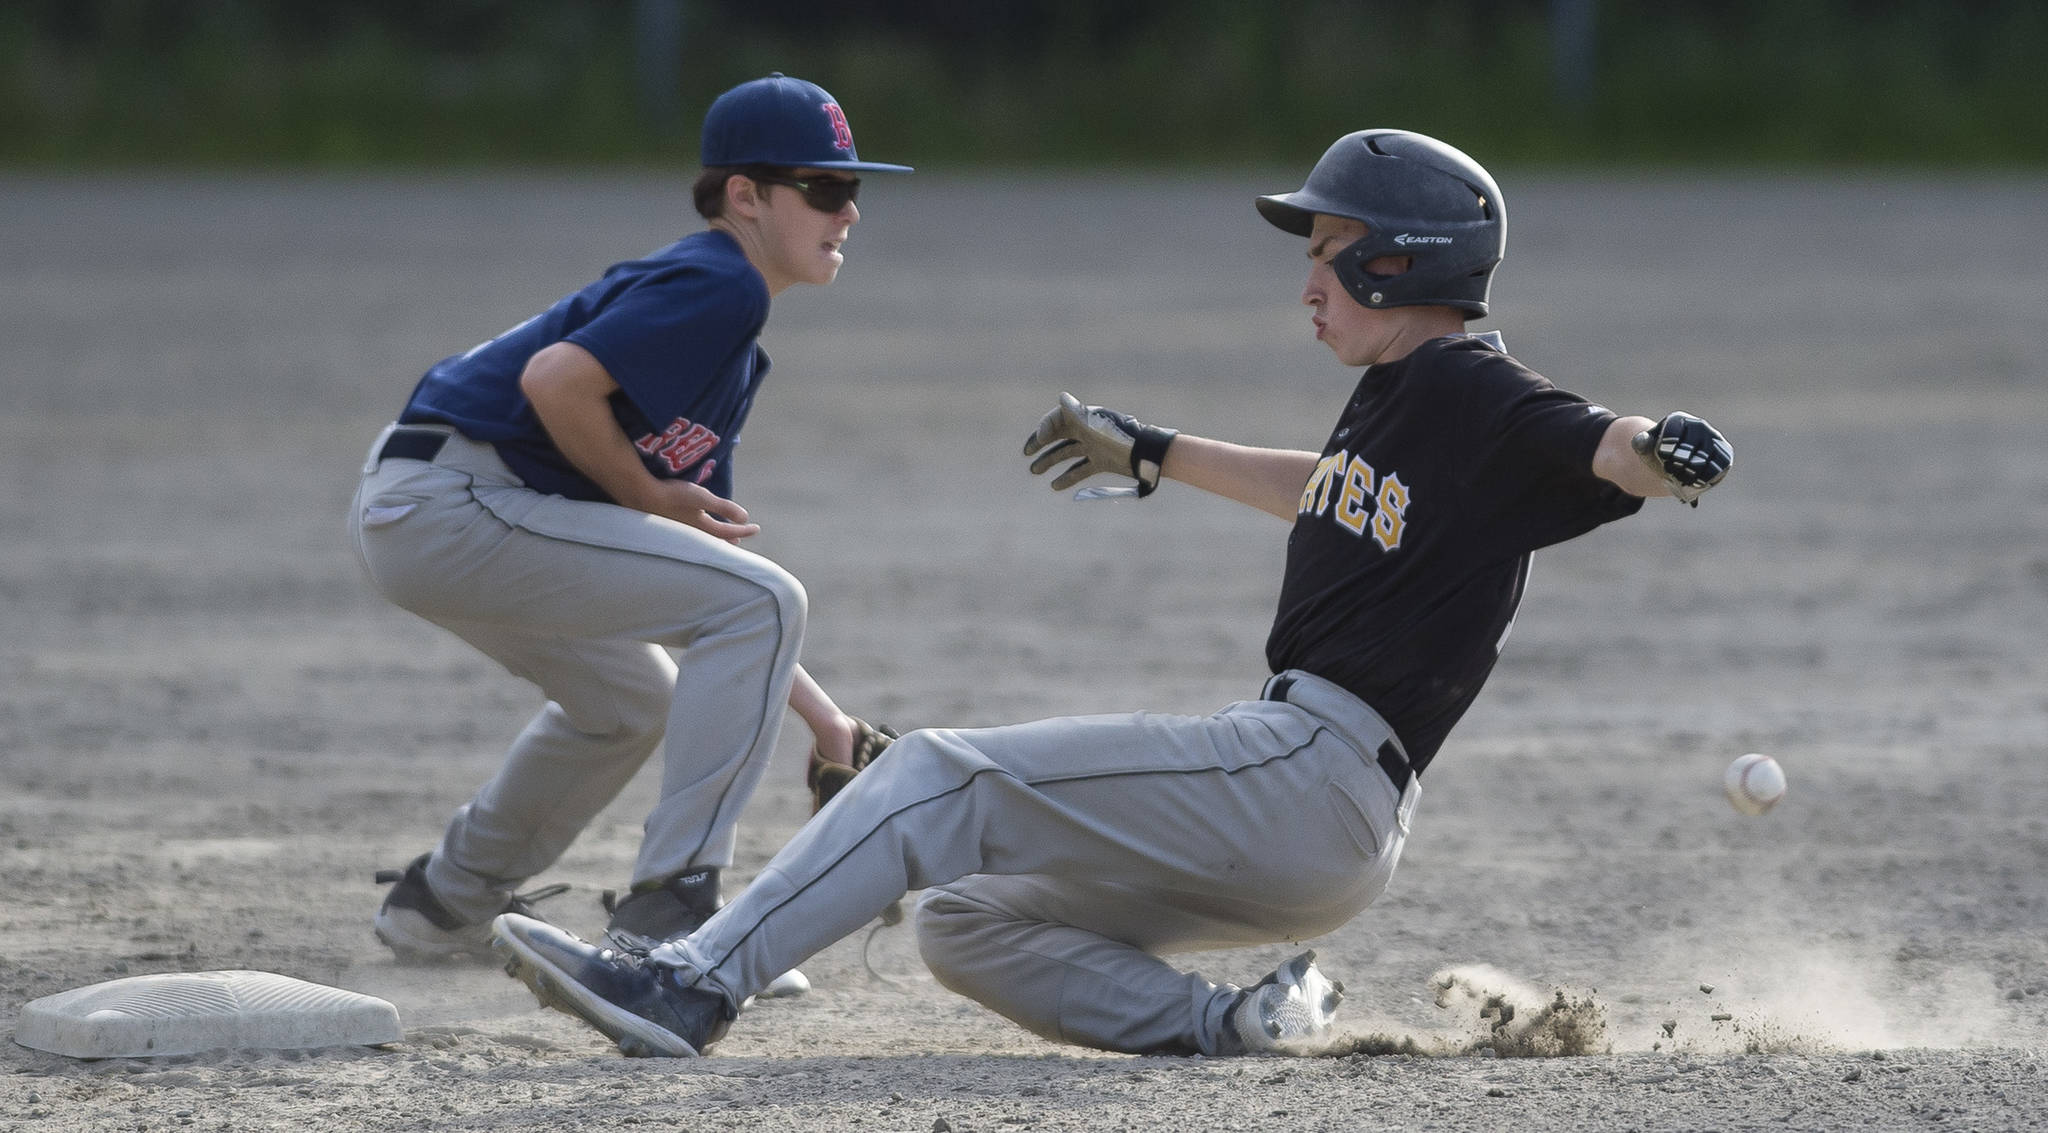 Pirates’ Josh Carte steals second base as Red Sox’s Caden Mesdag fields the throw from home in the third inning at the Gastineau Channel Little League Junior Division Championship game at Adair-Kennedy Memorial Park on Friday. The Pirates won 8-6. (Michael Penn | Juneau Empire)